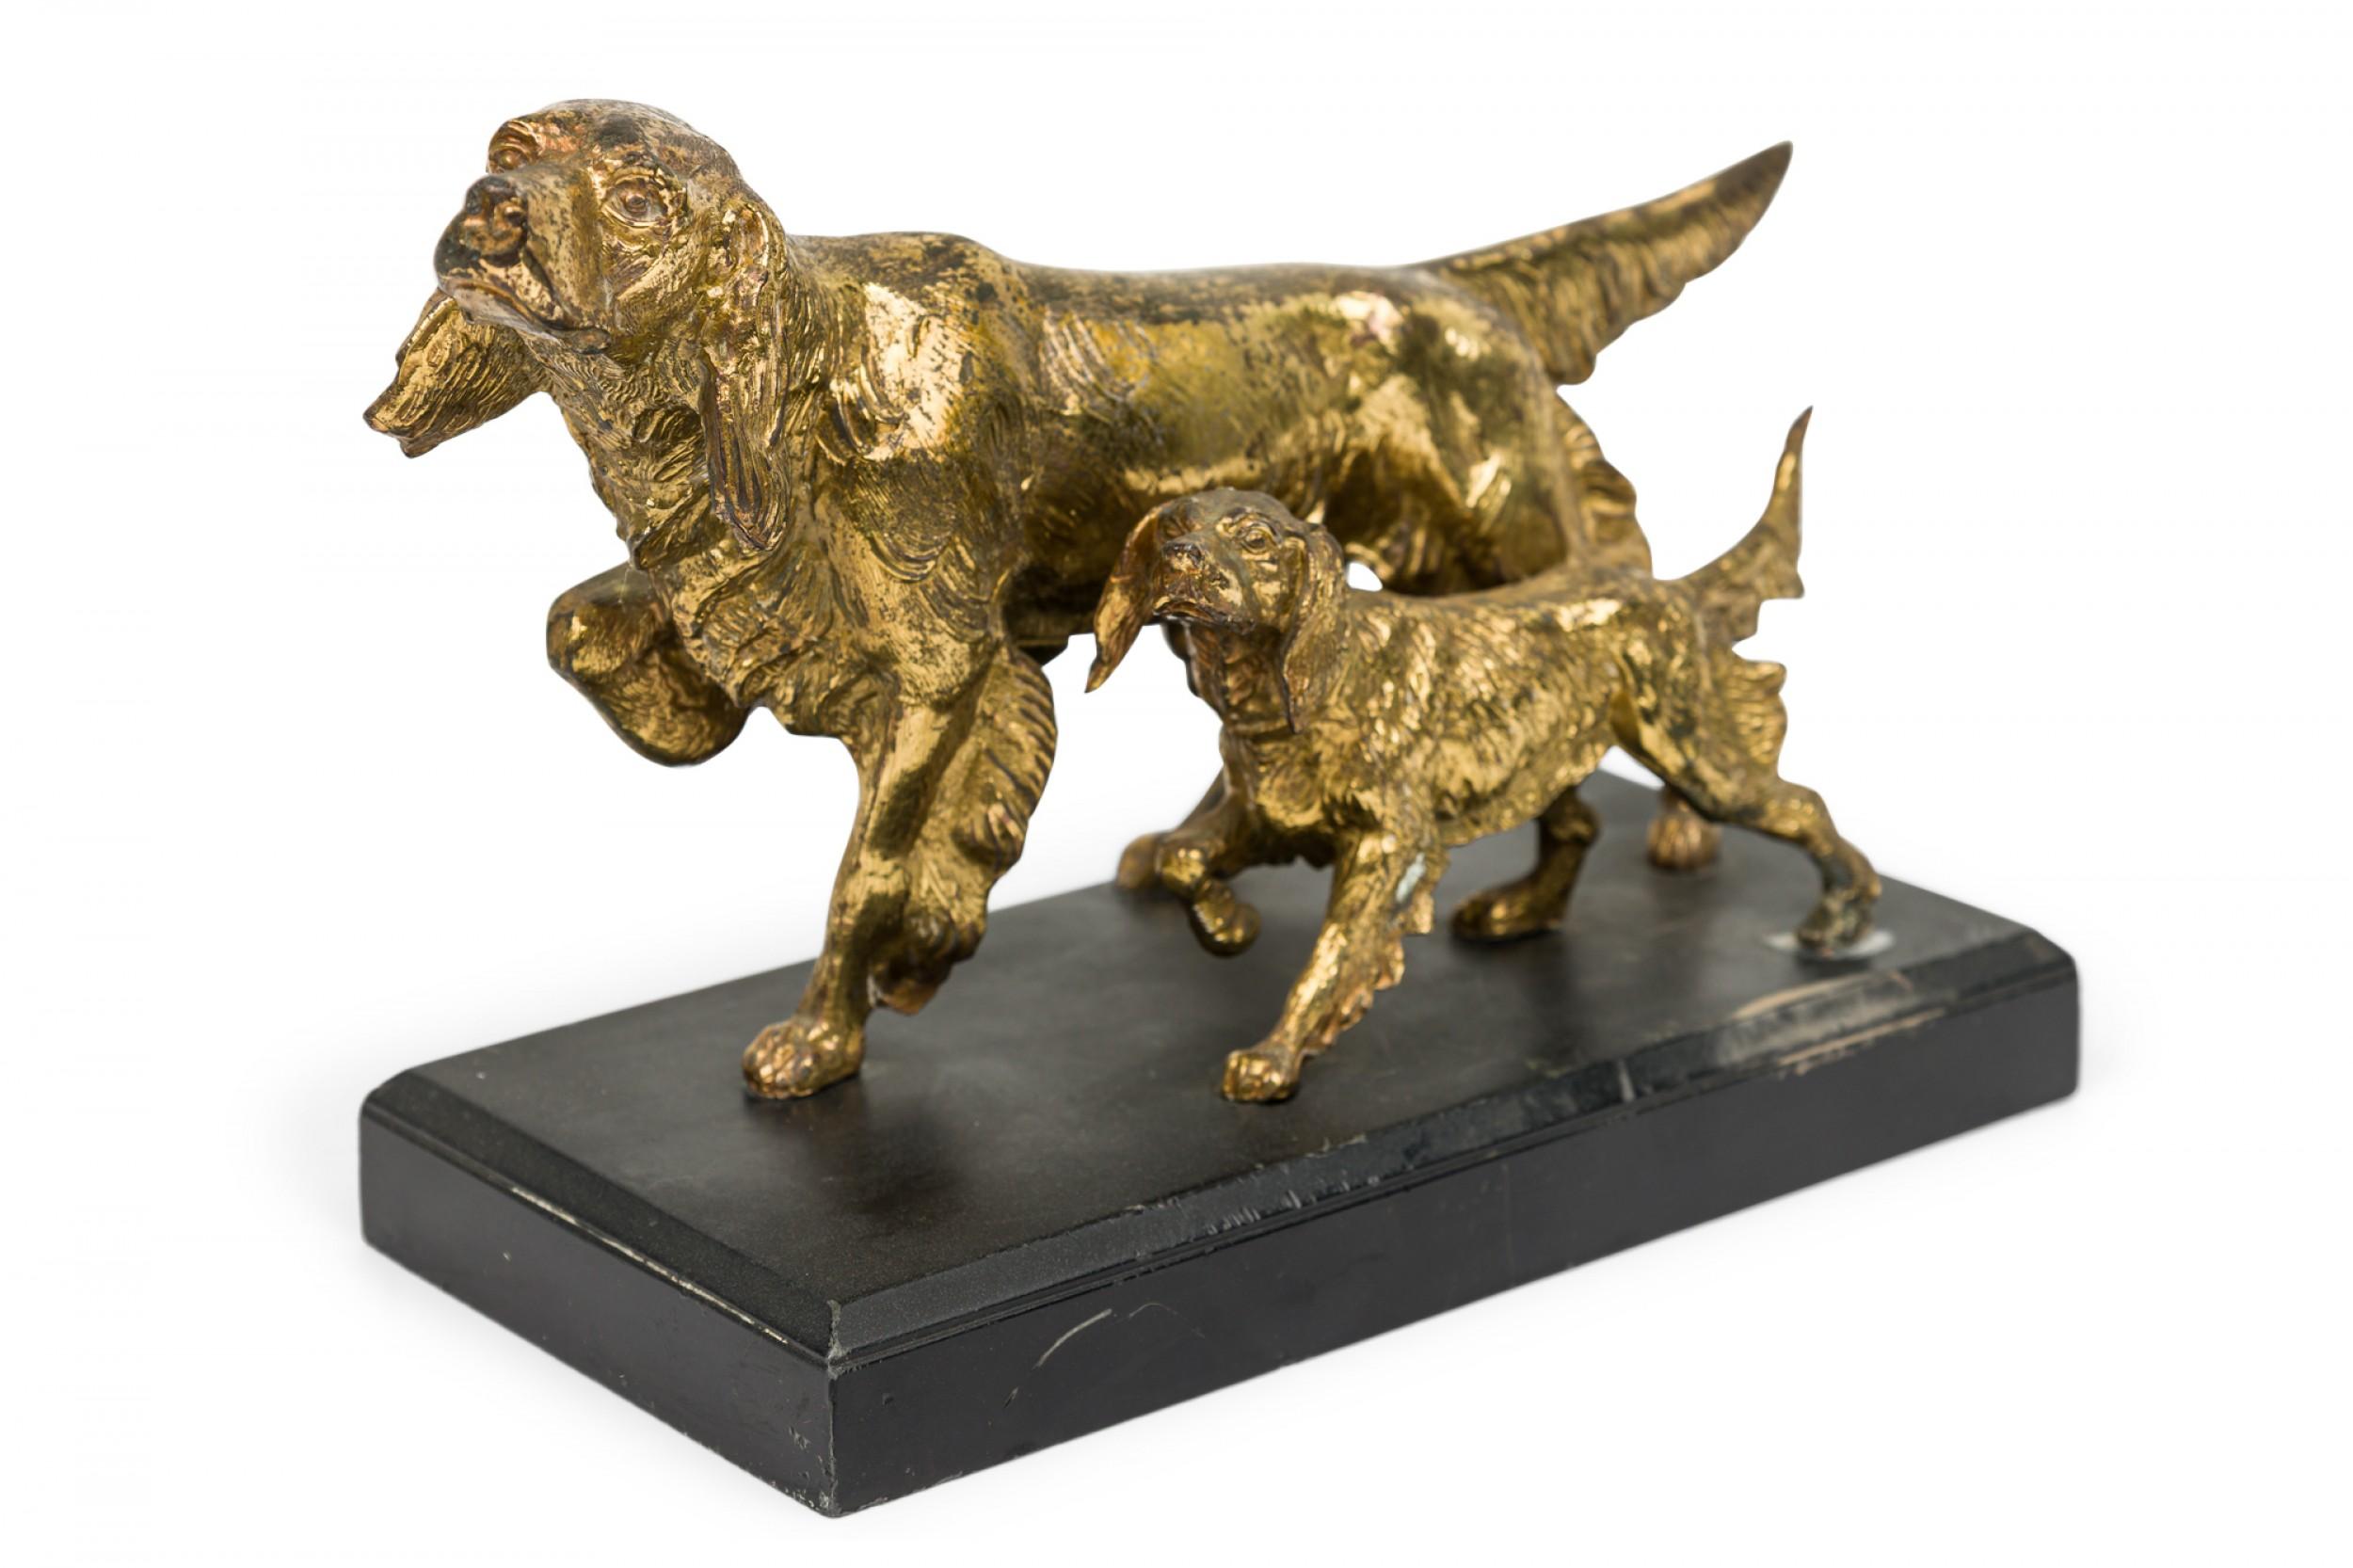 English Victorian-style group of two brass spaniel dogs mid-stride atop a rectangular black cast iron base.